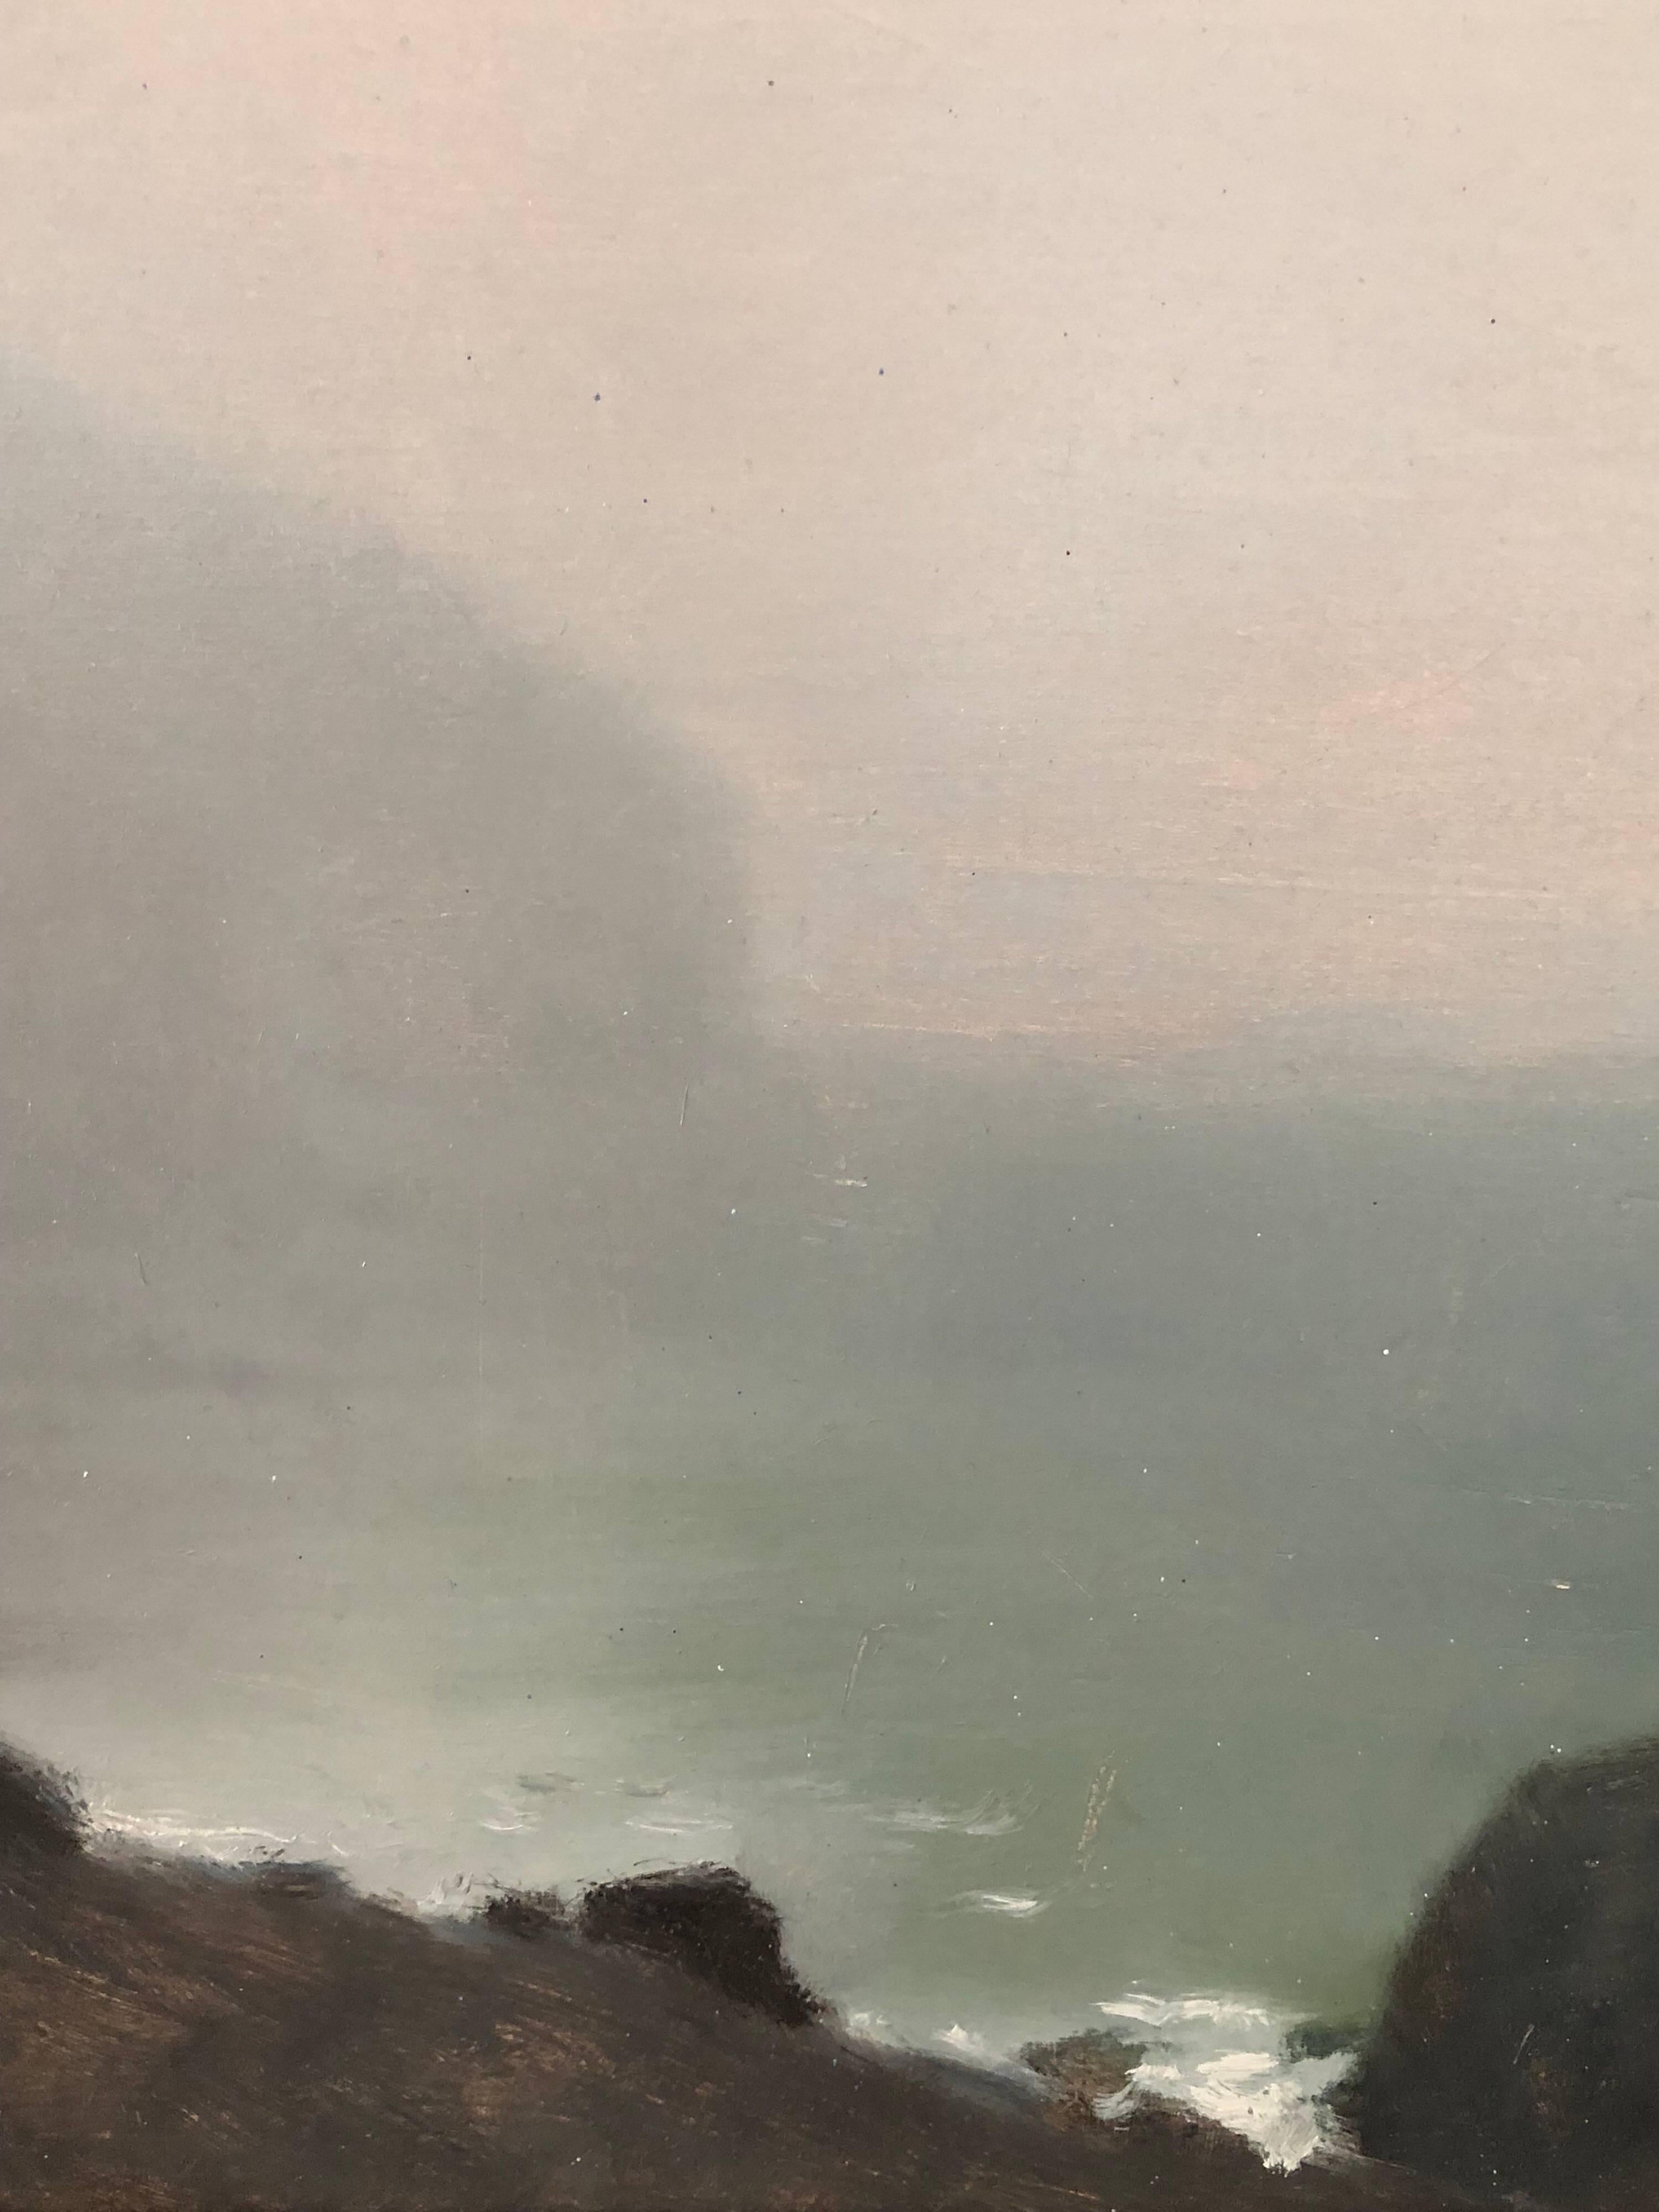 A Study in Fog - Painting by Donald Jurney